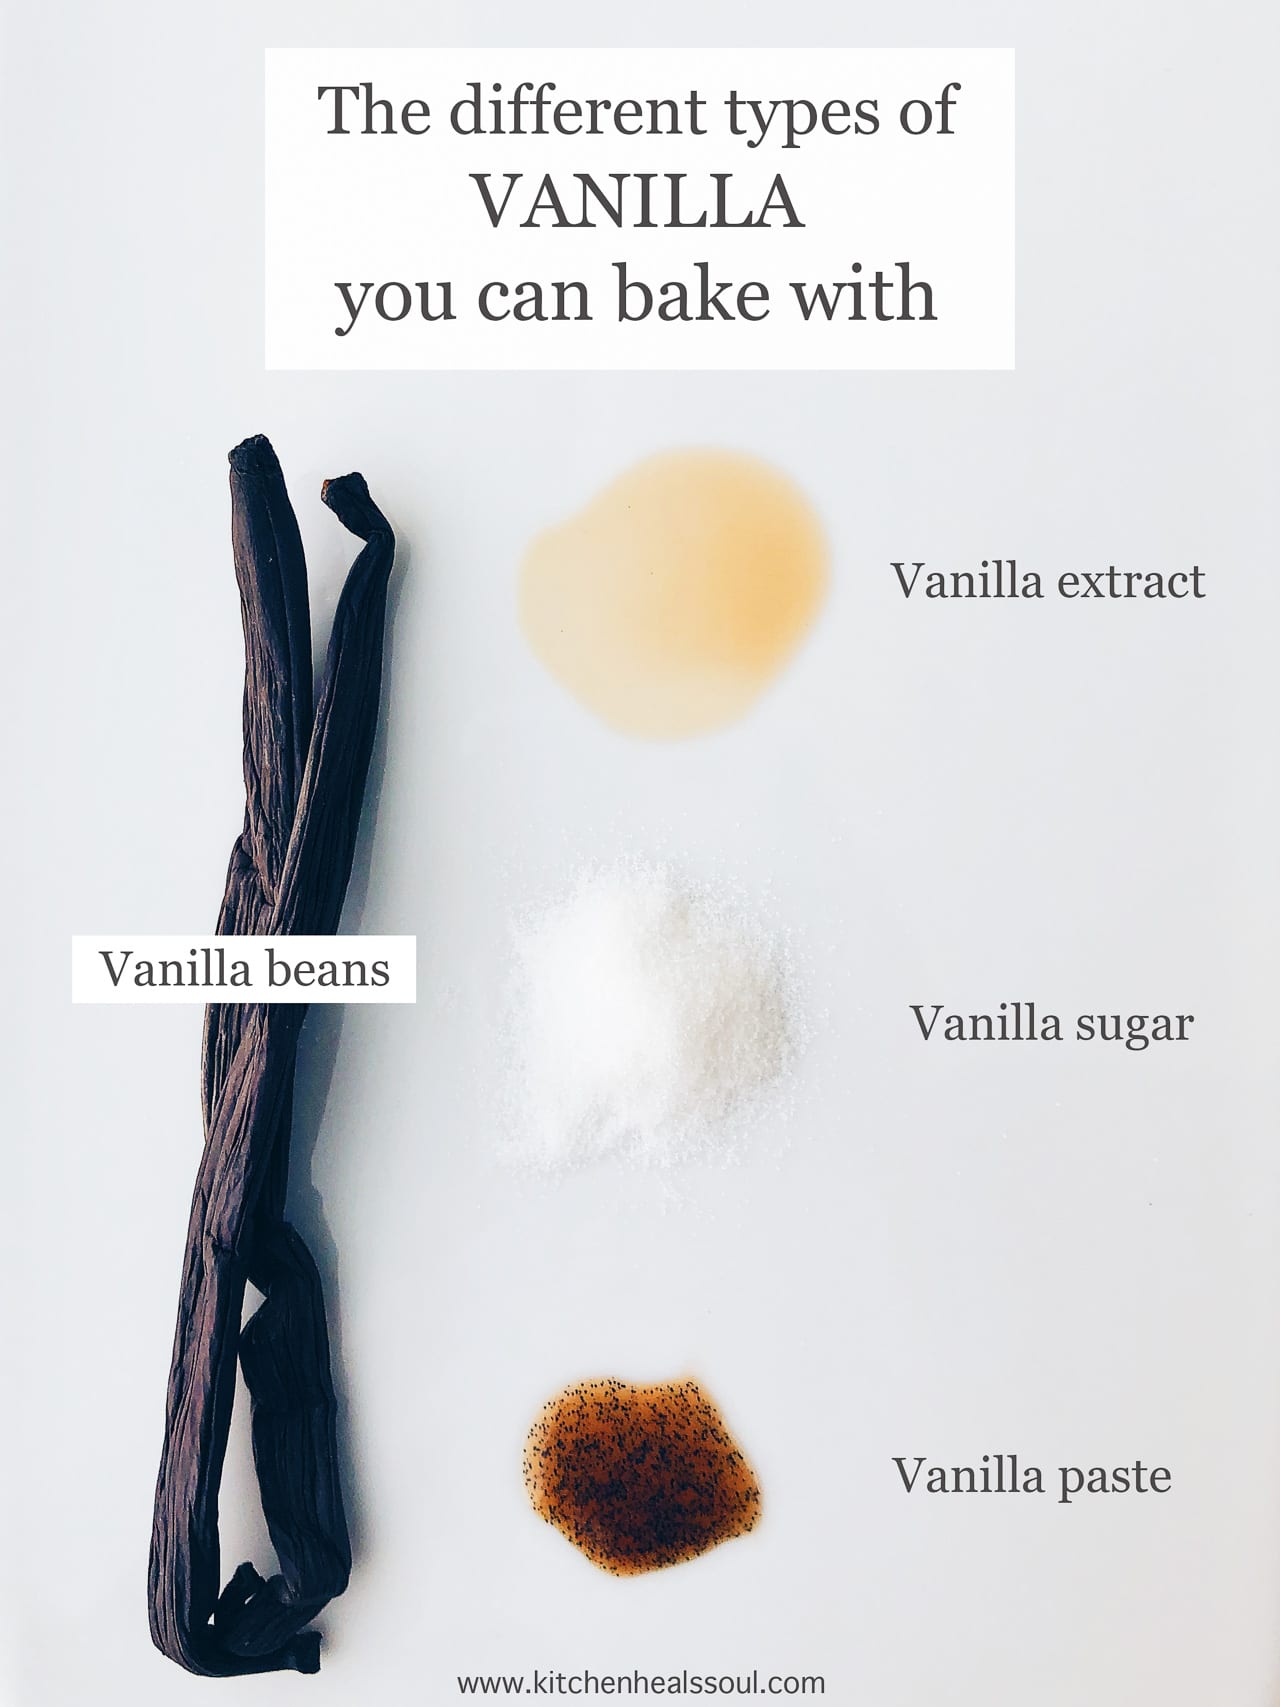 The different types of vanilla you can bake with featuring vanilla beans, extract, sugar, and paste